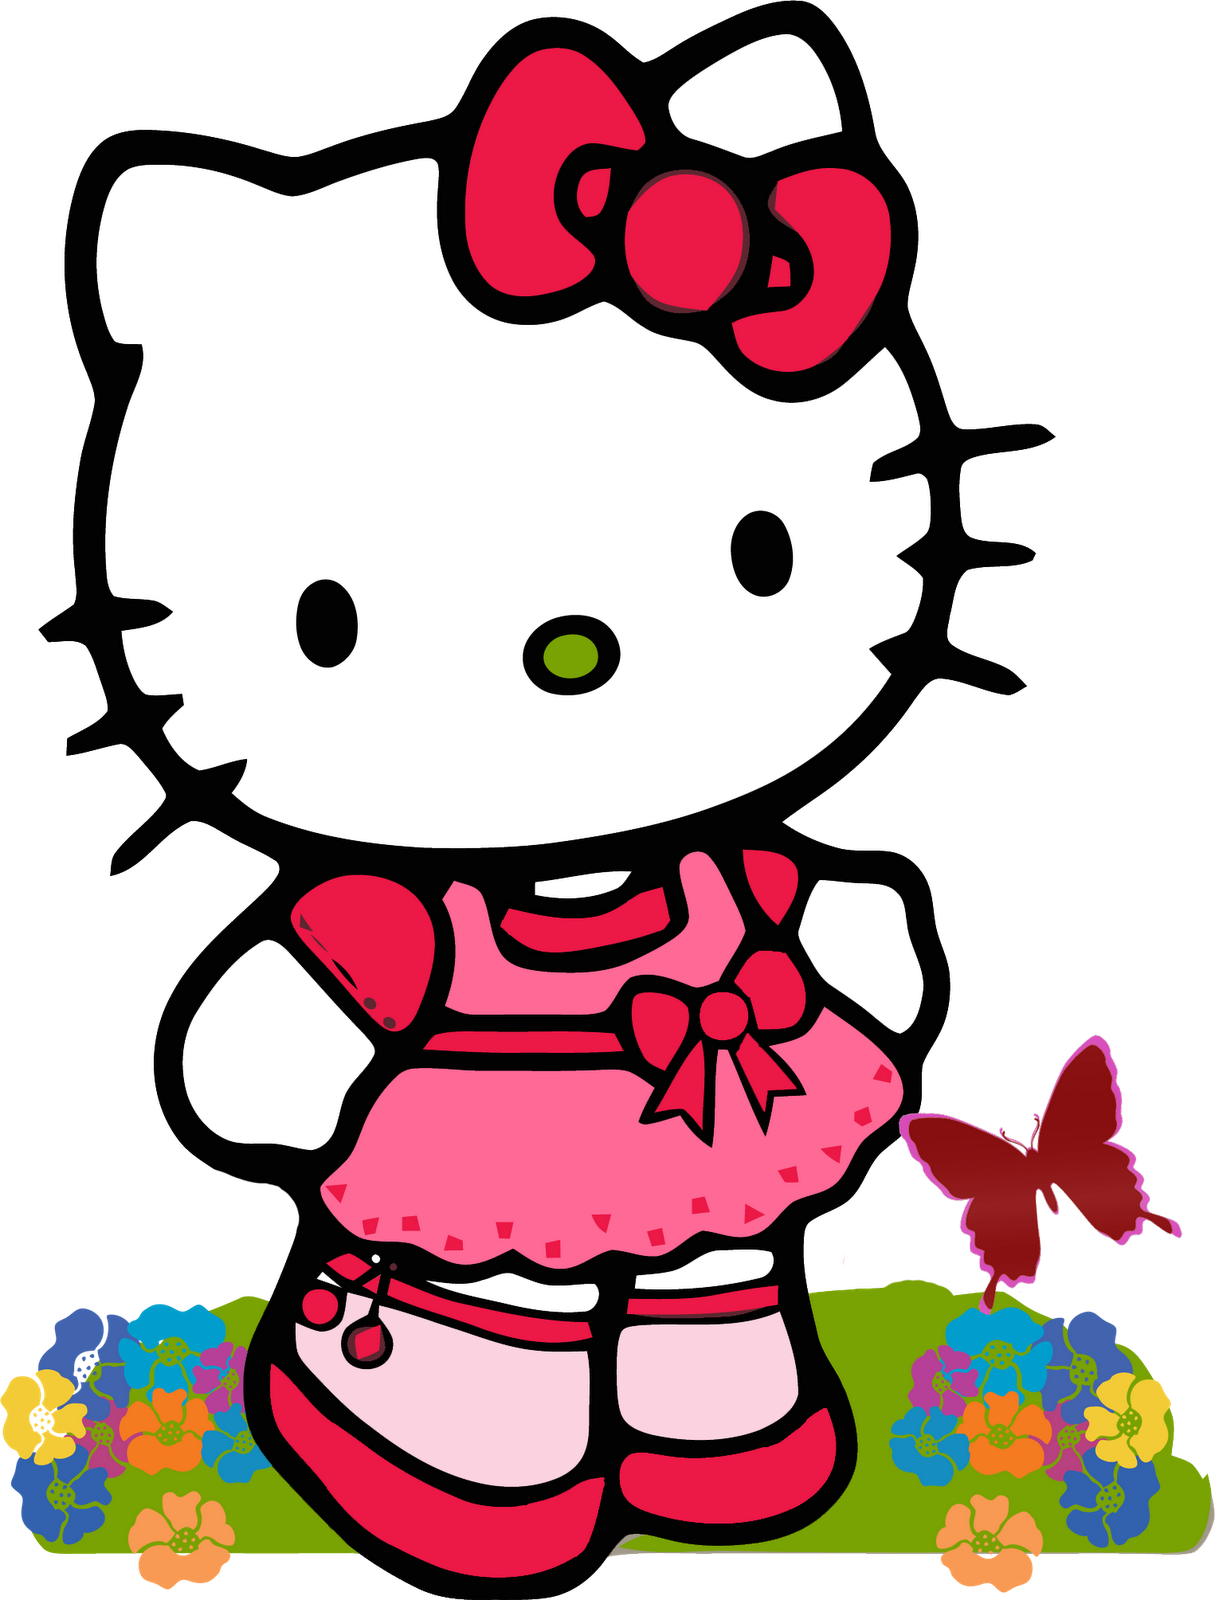 Hello Kitty With Balloons Png | Free Download Clip Art | Free Clip ...